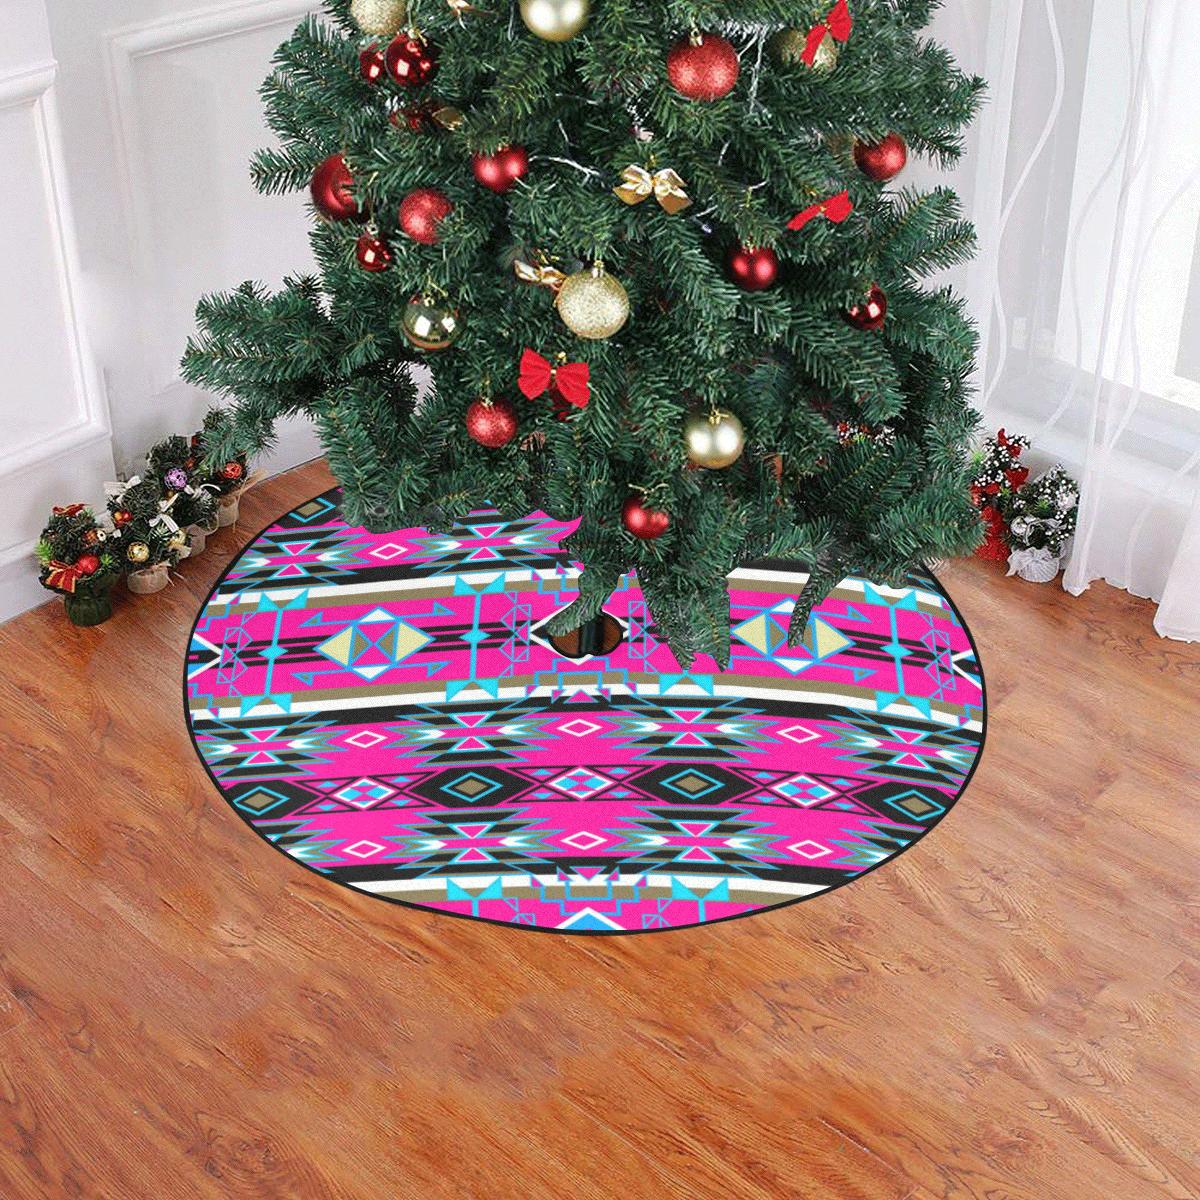 Force of Nature Sunset Storm Christmas Tree Skirt 47" x 47" Christmas Tree Skirt e-joyer 